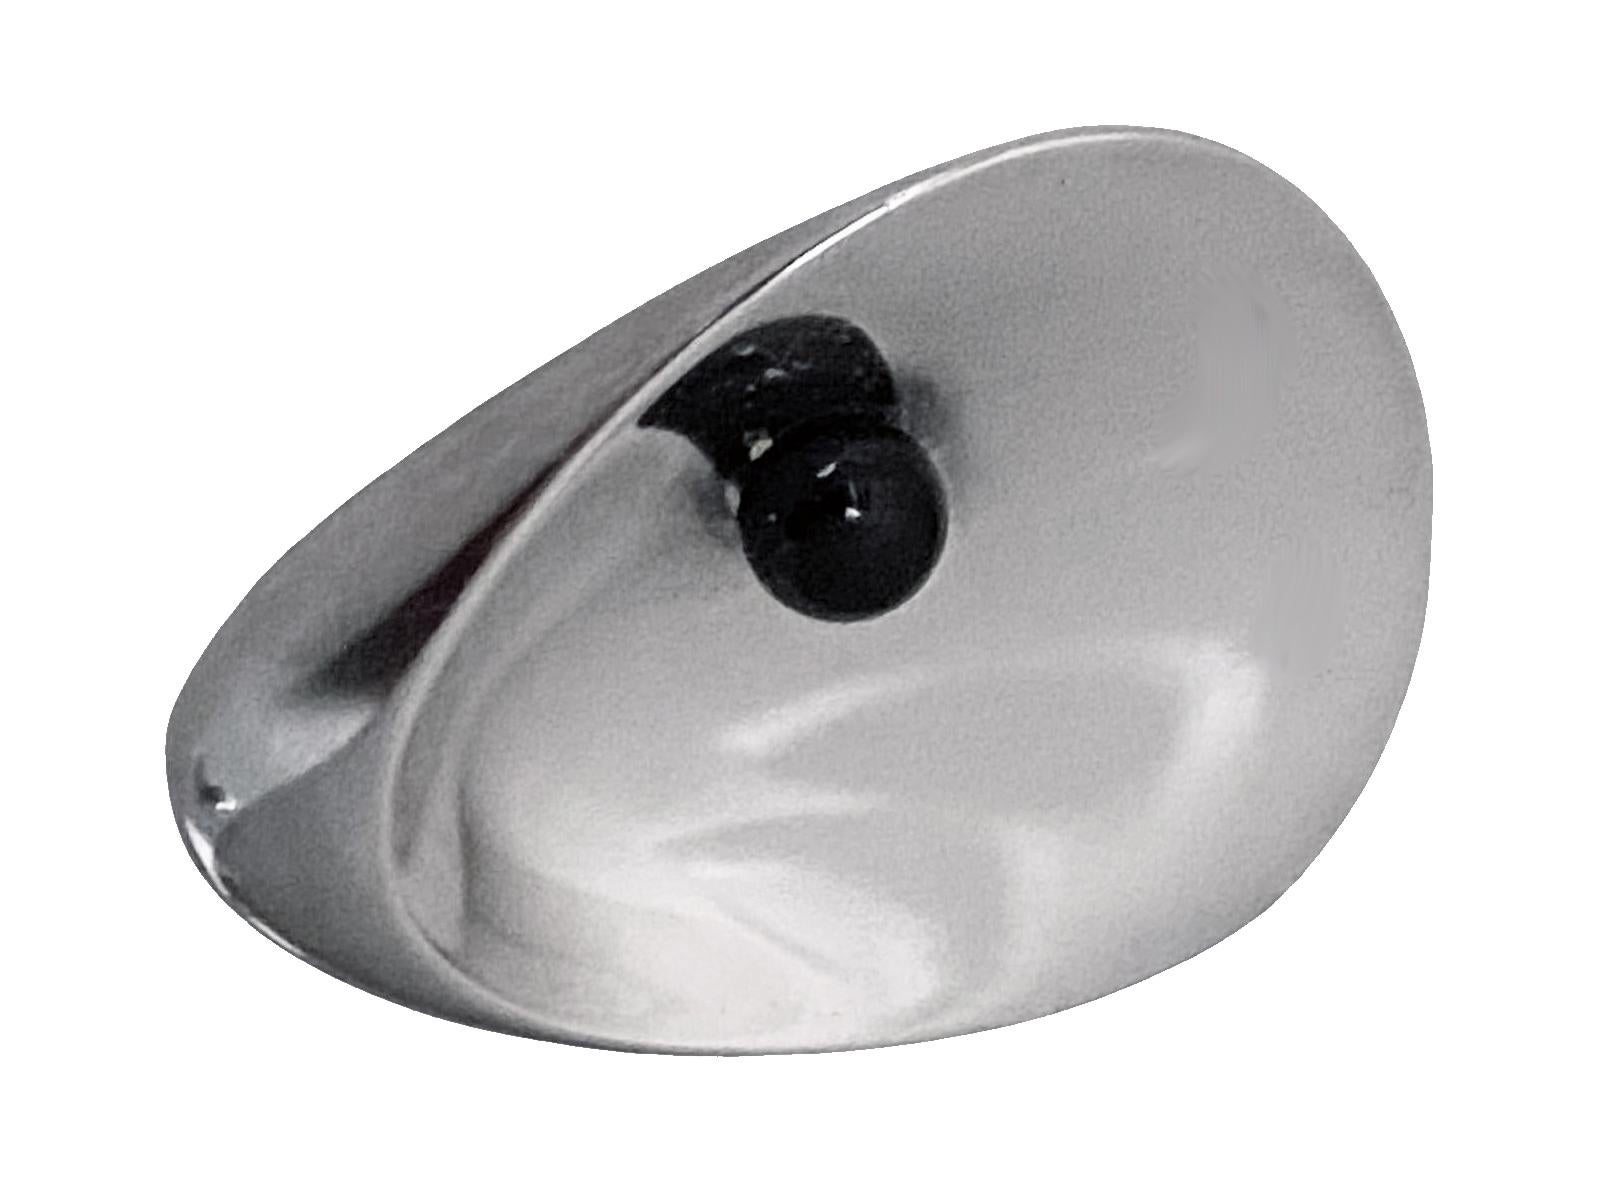 Georg Jensen Nanna Ditzel Sterling Hematite Brooch, design no 328, Nana and Jorgen Ditzel C.1960. The brooch in the form of an oyster with pearl. Measures: 2 1/8 x 1 5/8 inches. Total Item Weight: 24.11 grams. Full Georg Jensen and NJ marks to